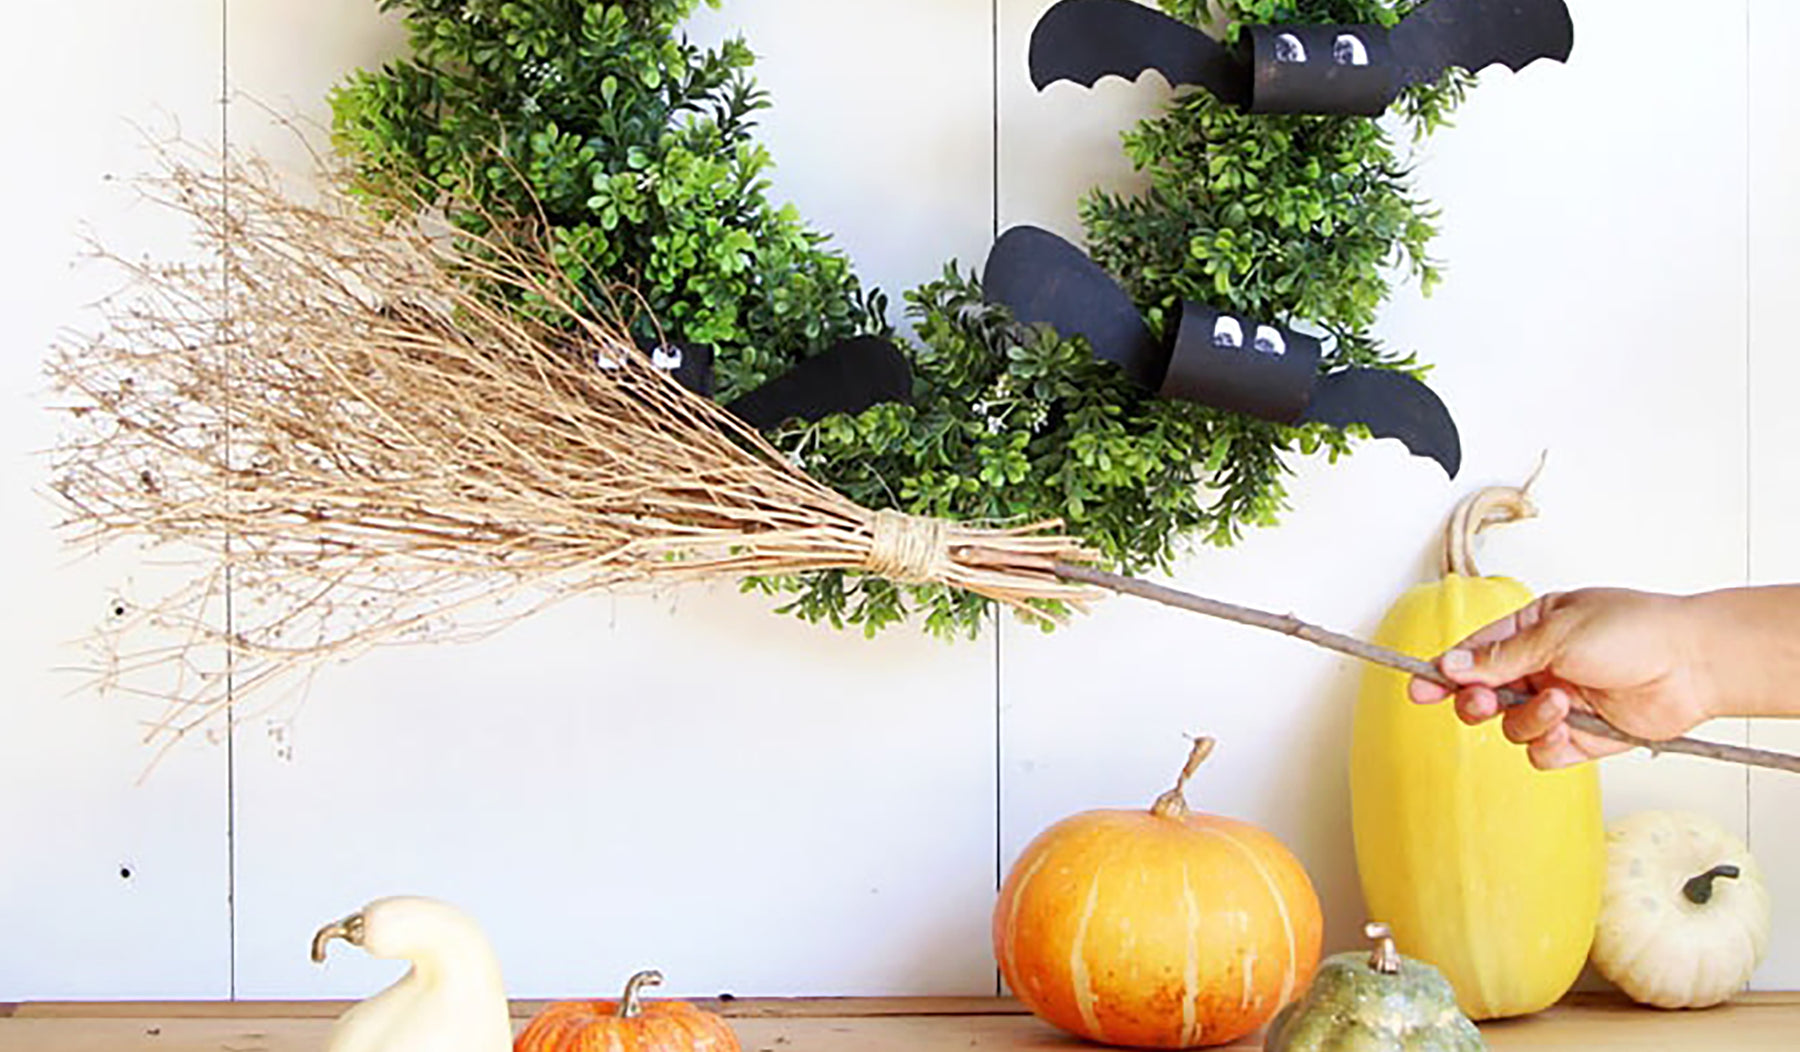 Broomstick made of branches held by hand over table of pumpkins and bat decorations.